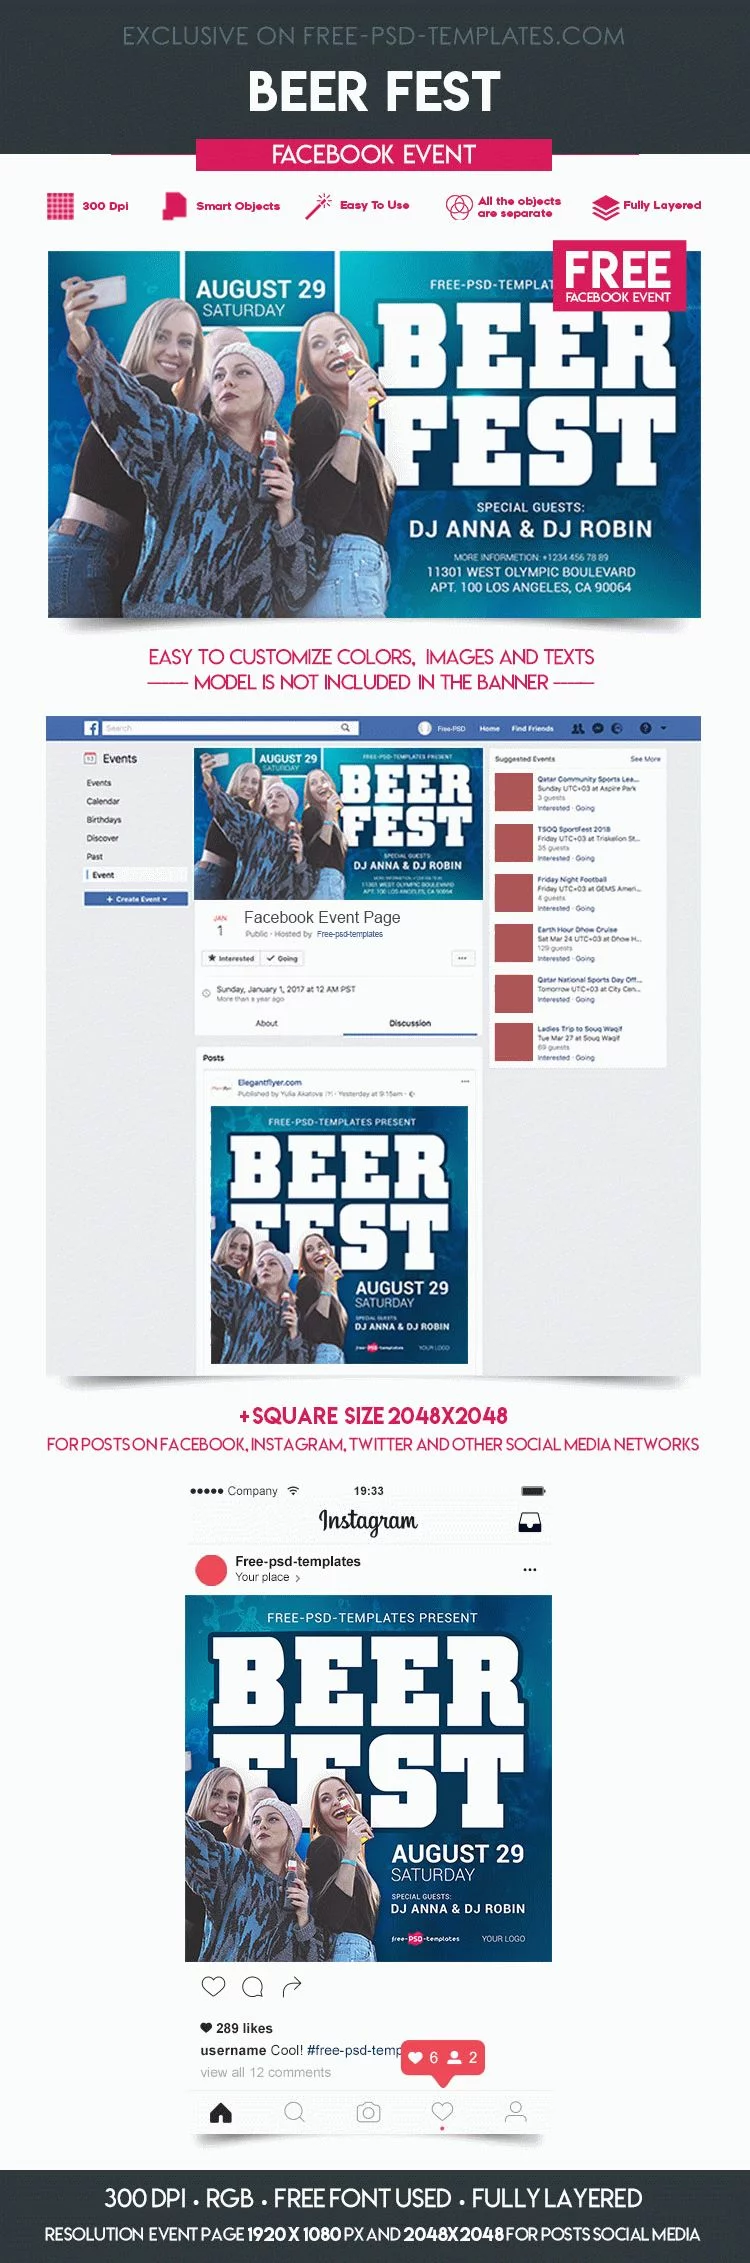 Free Beer Fest Facebook Event Page